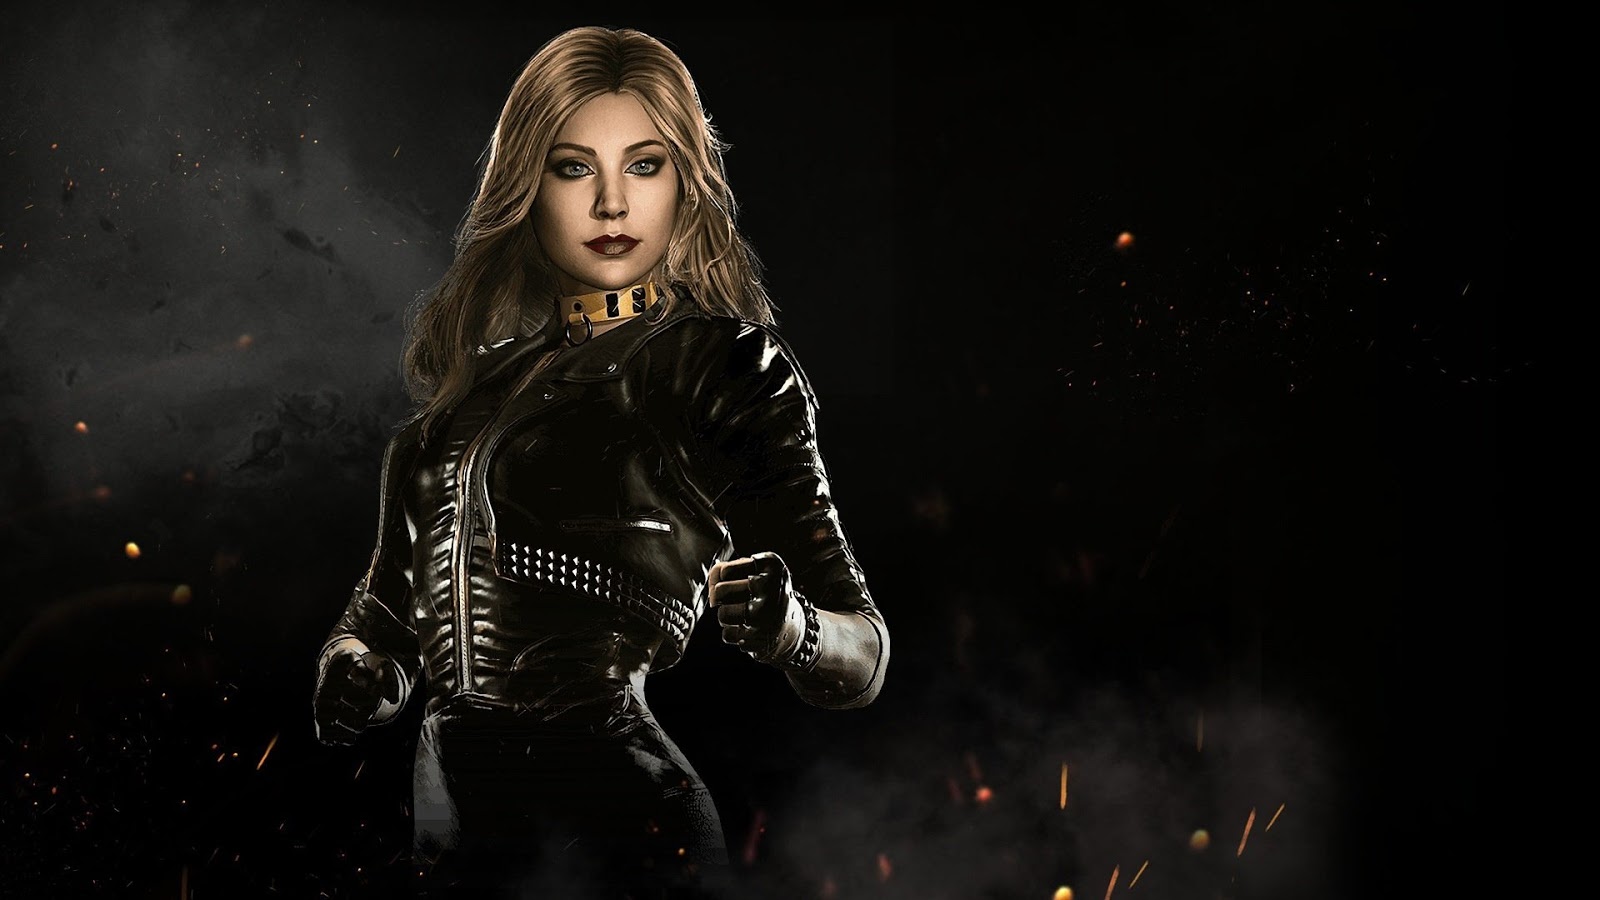 Injustice 2 Black Canary Wallpaper - Black Canary Injustice 2 , HD Wallpaper & Backgrounds